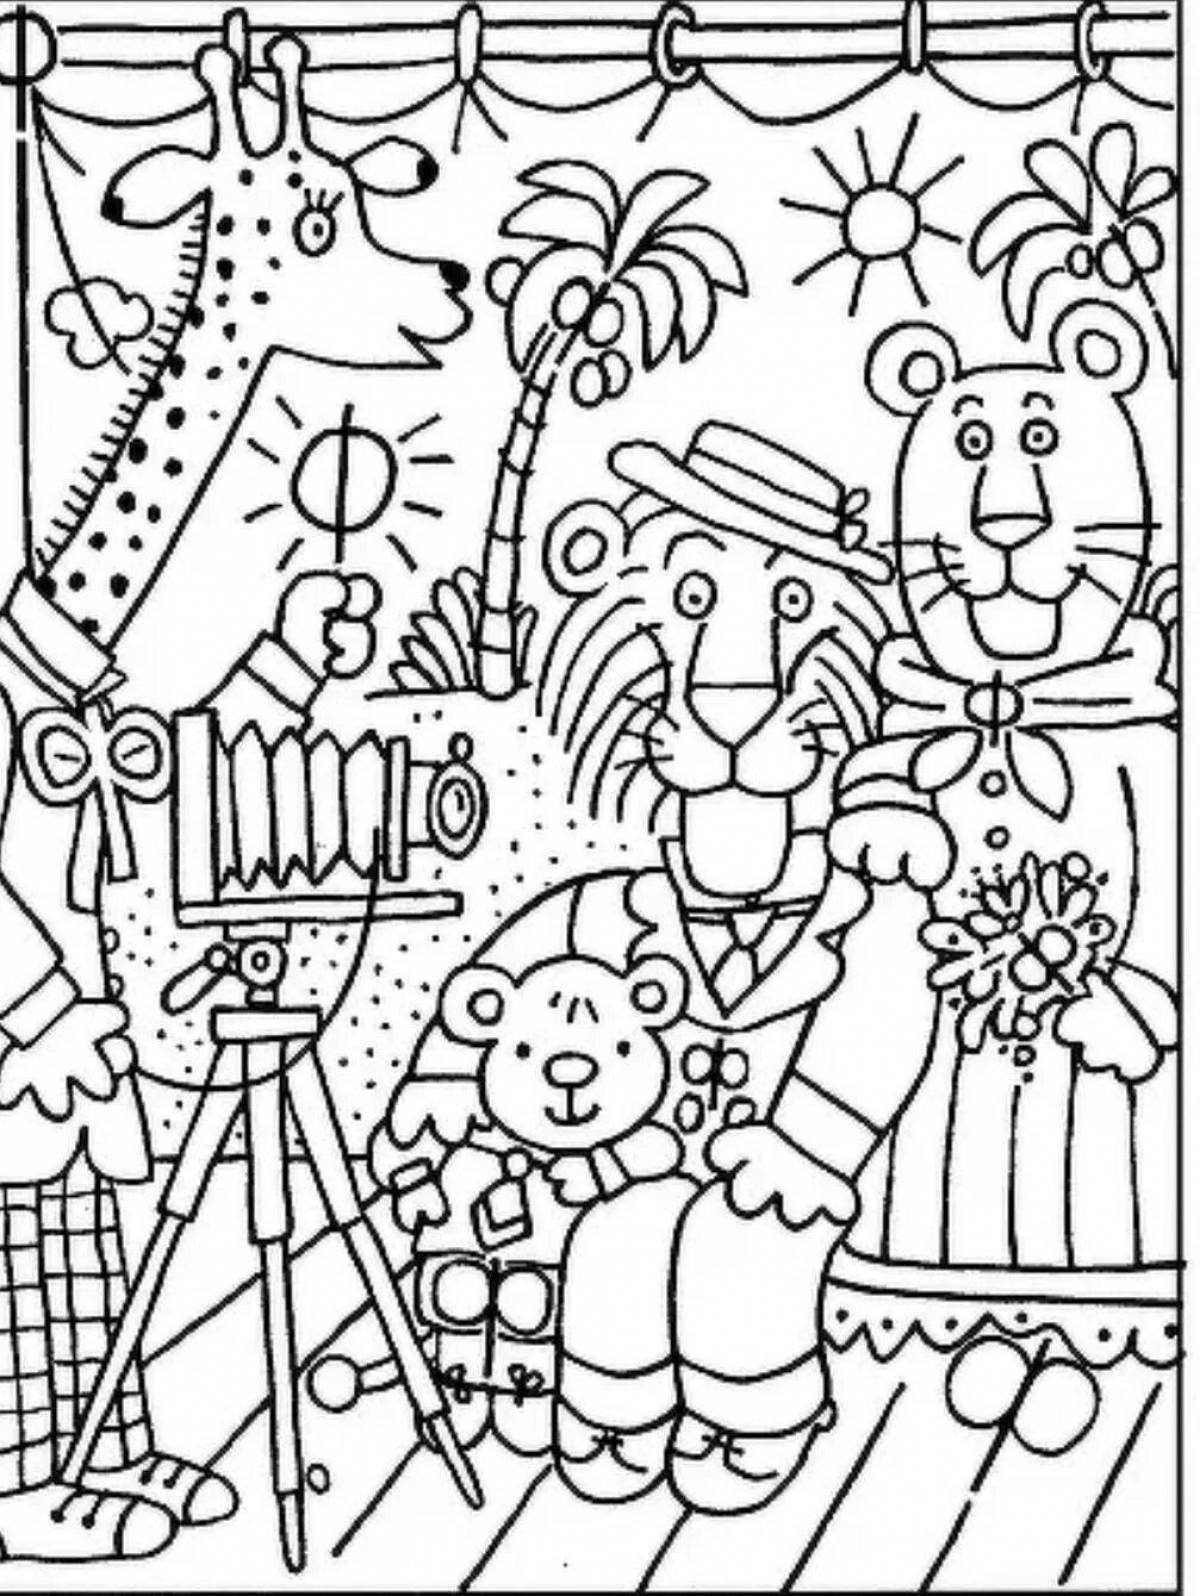 Radiant c coloring page